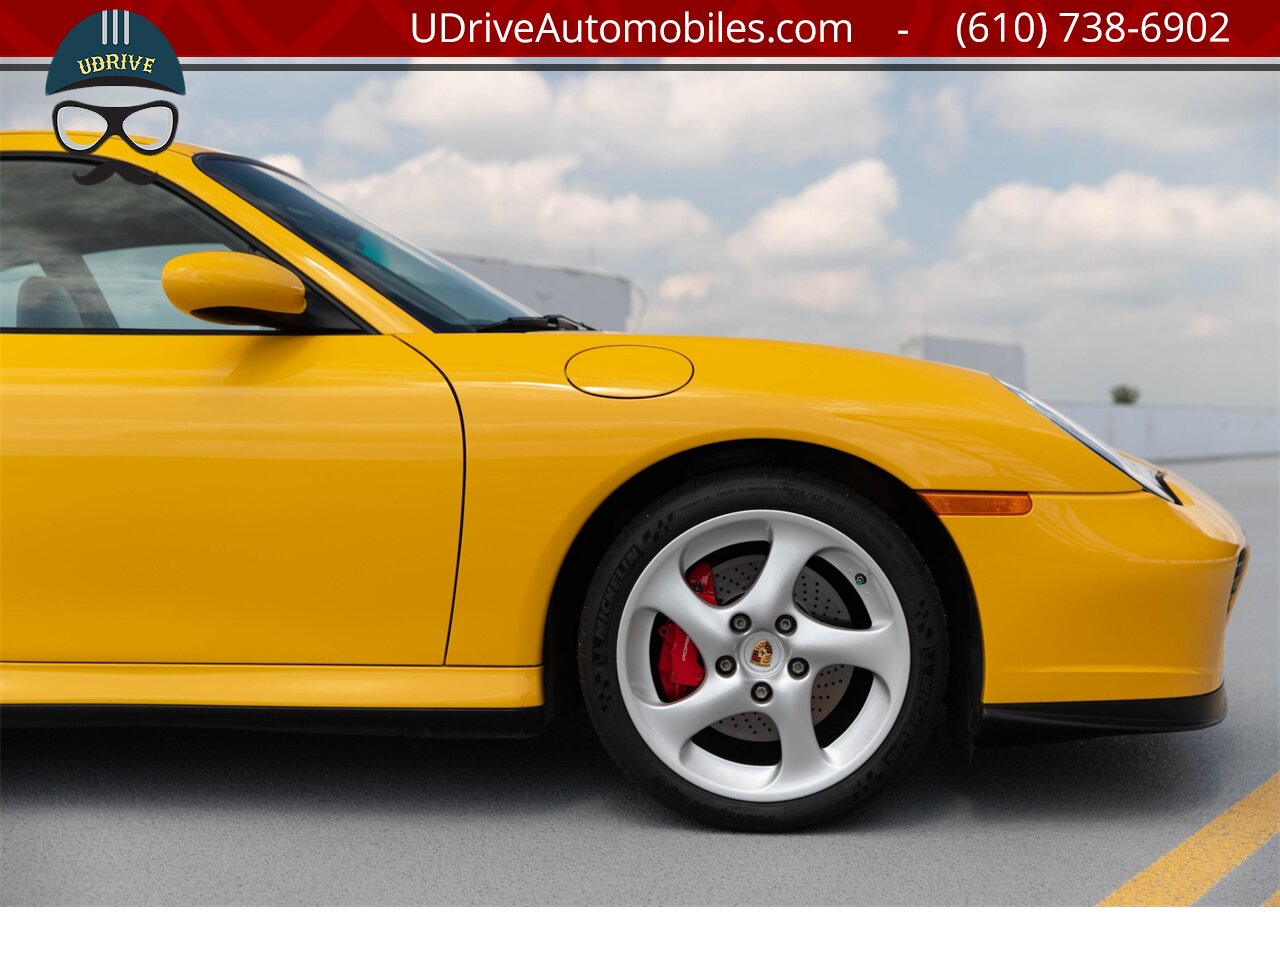 2003 Porsche 911 996 Turbo X50 6Sp Nephrite Green Lthr 9k Miles  Deviating Yellow Stitching Collector Grade BACK AGAIN - Photo 13 - West Chester, PA 19382